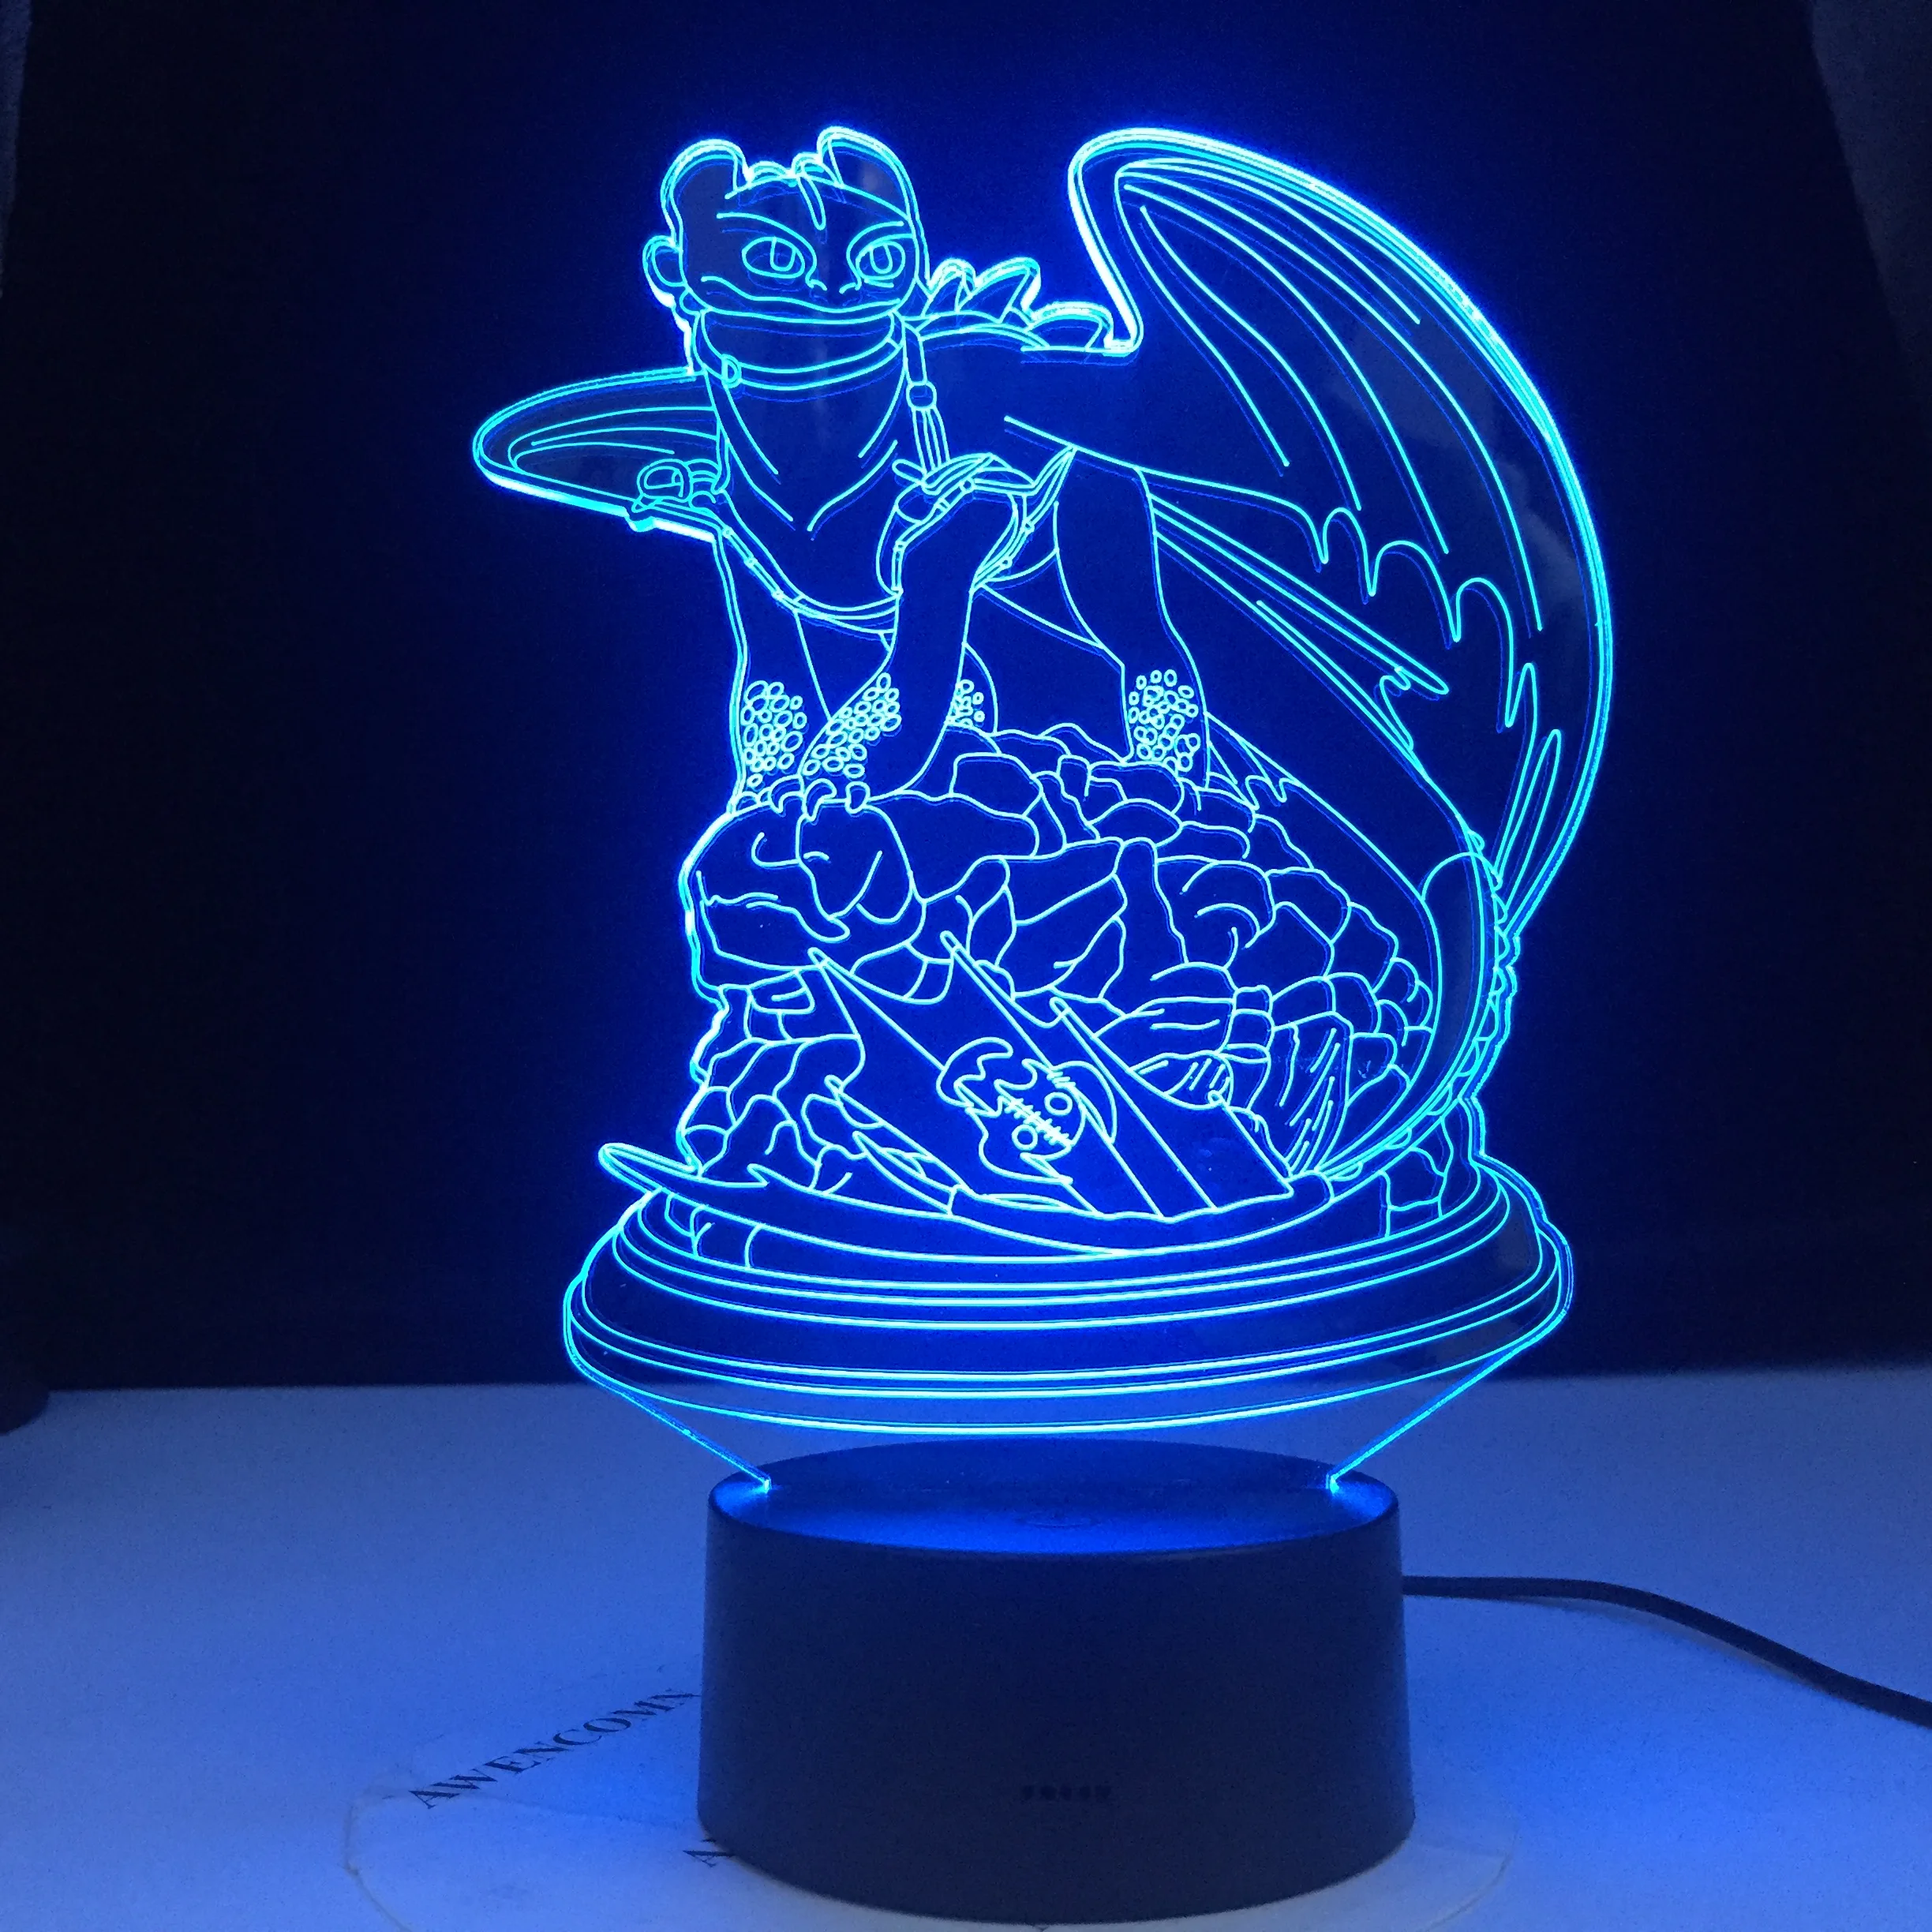 How to Train Your Dragon 2 Lamp Dragon Toothless Lamp Illusion Touch 3d Table Lamp Nightlight Light Fury Led Night Light